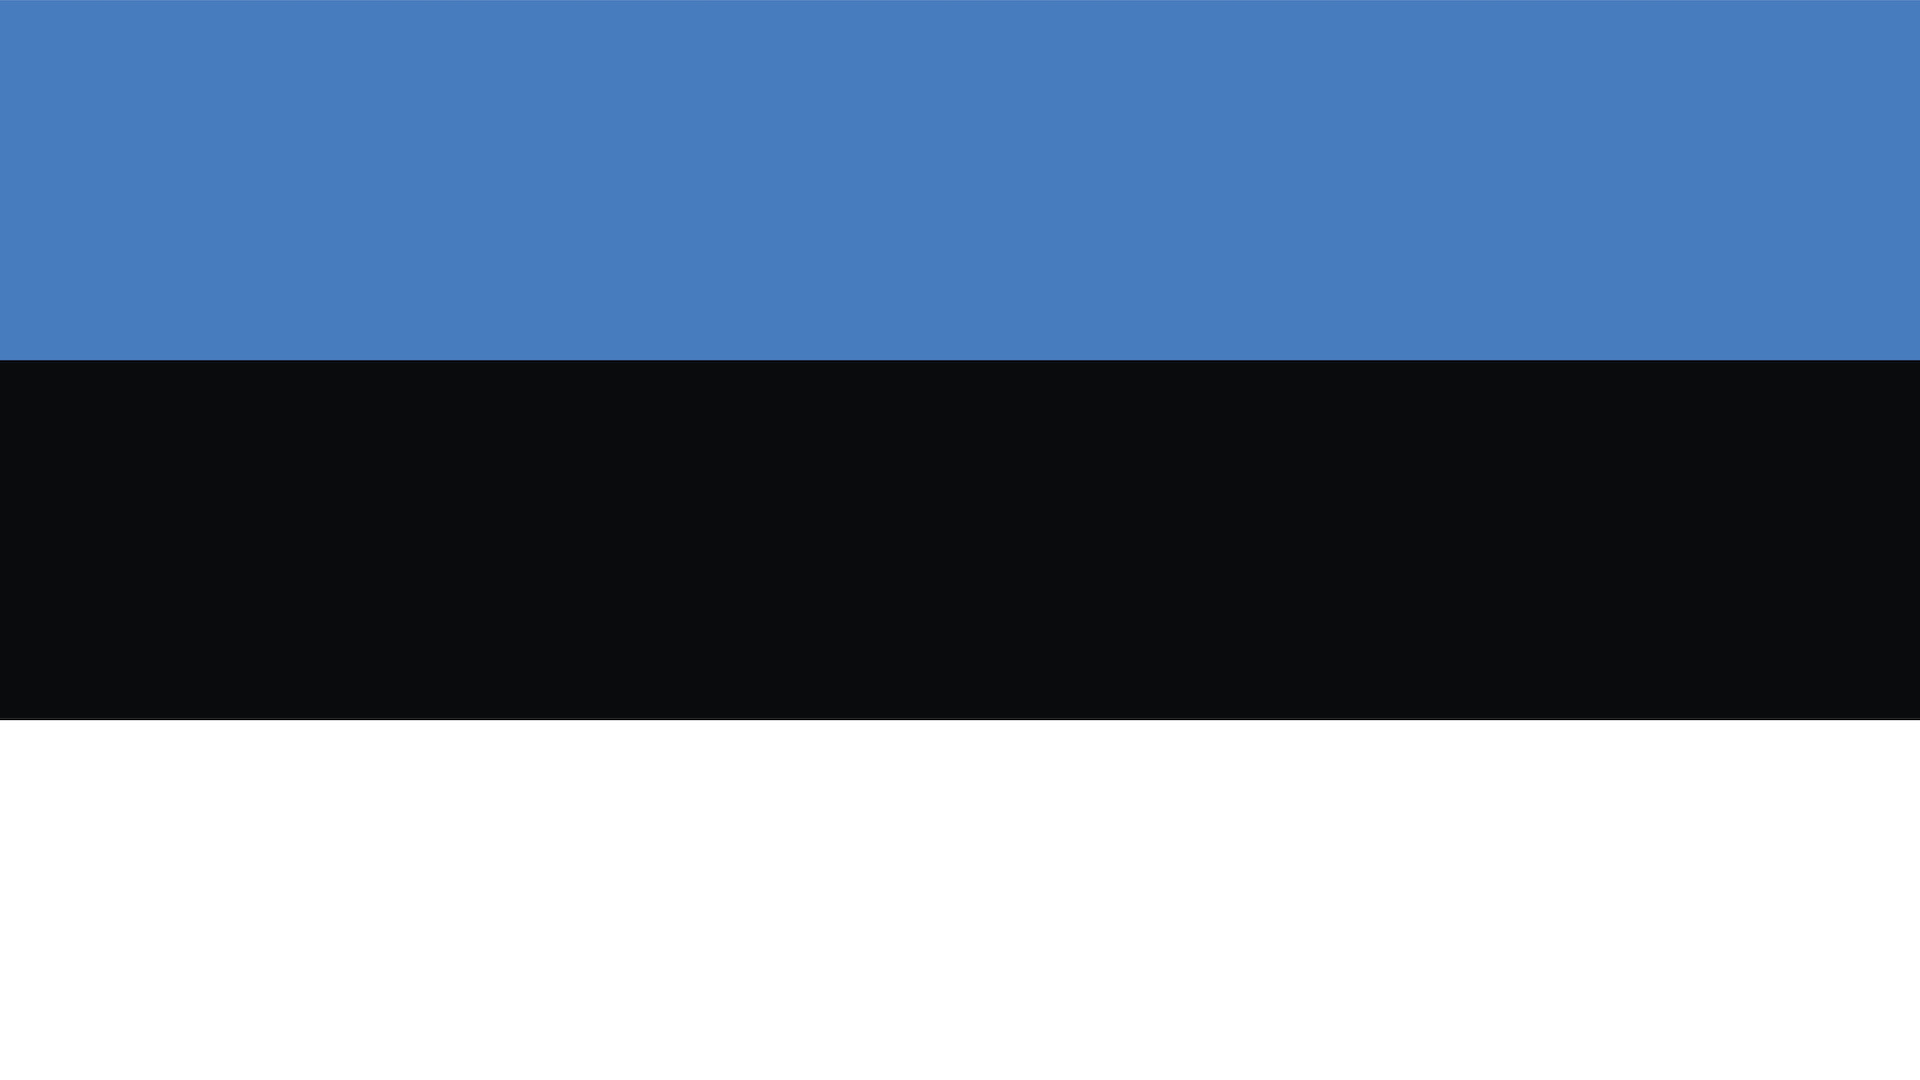 A blue, black and white striped flag